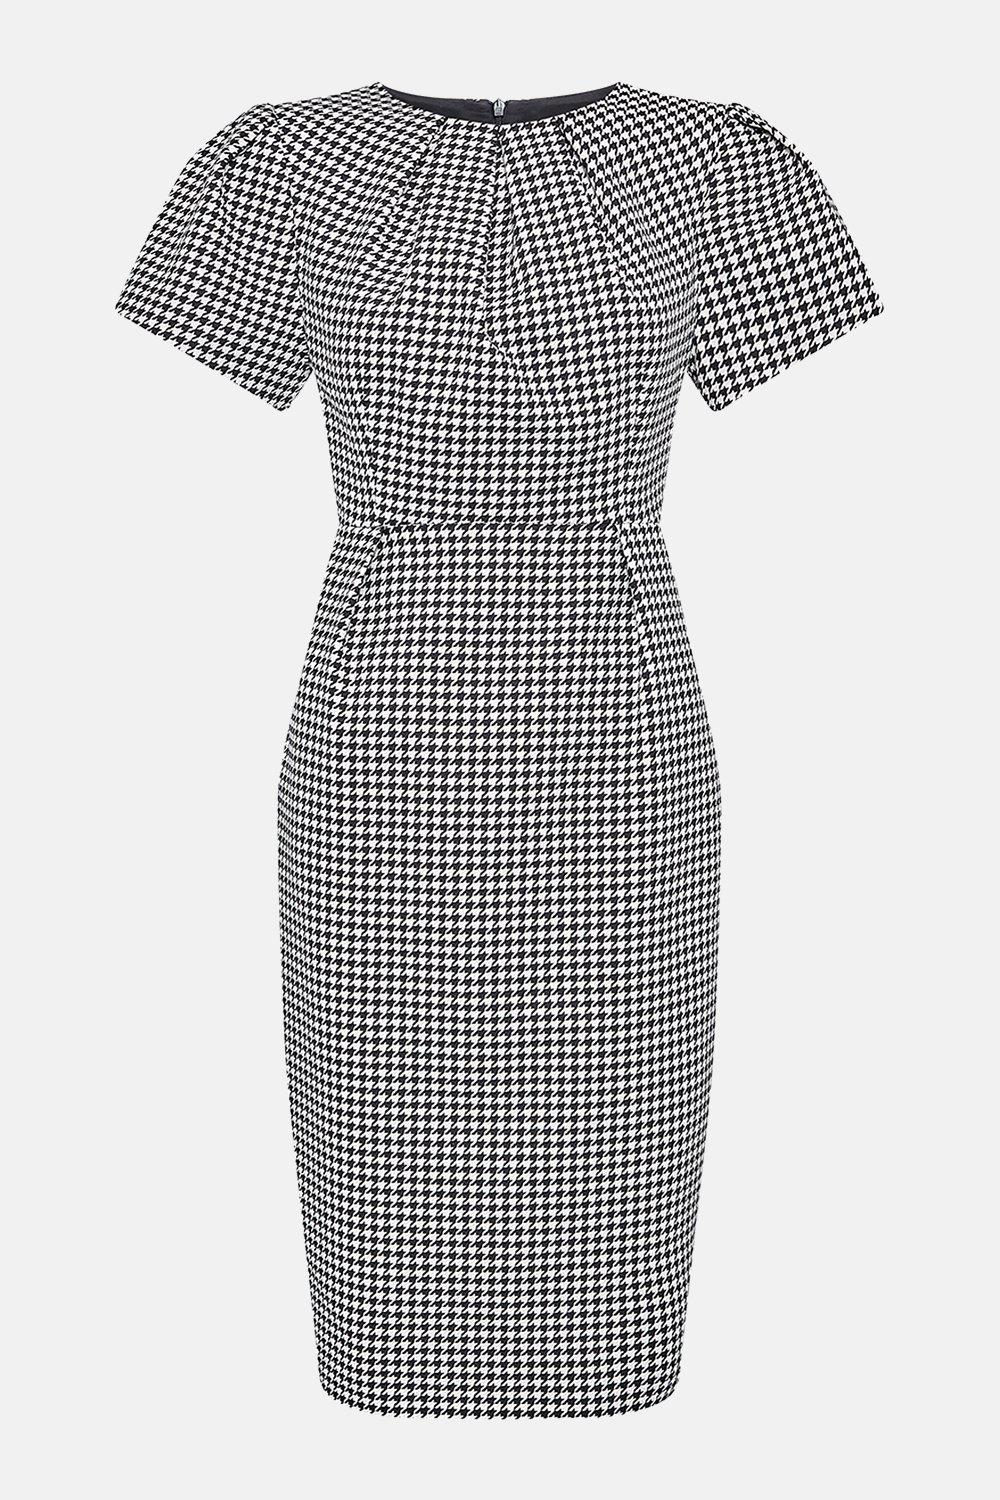 black and white dogtooth dress